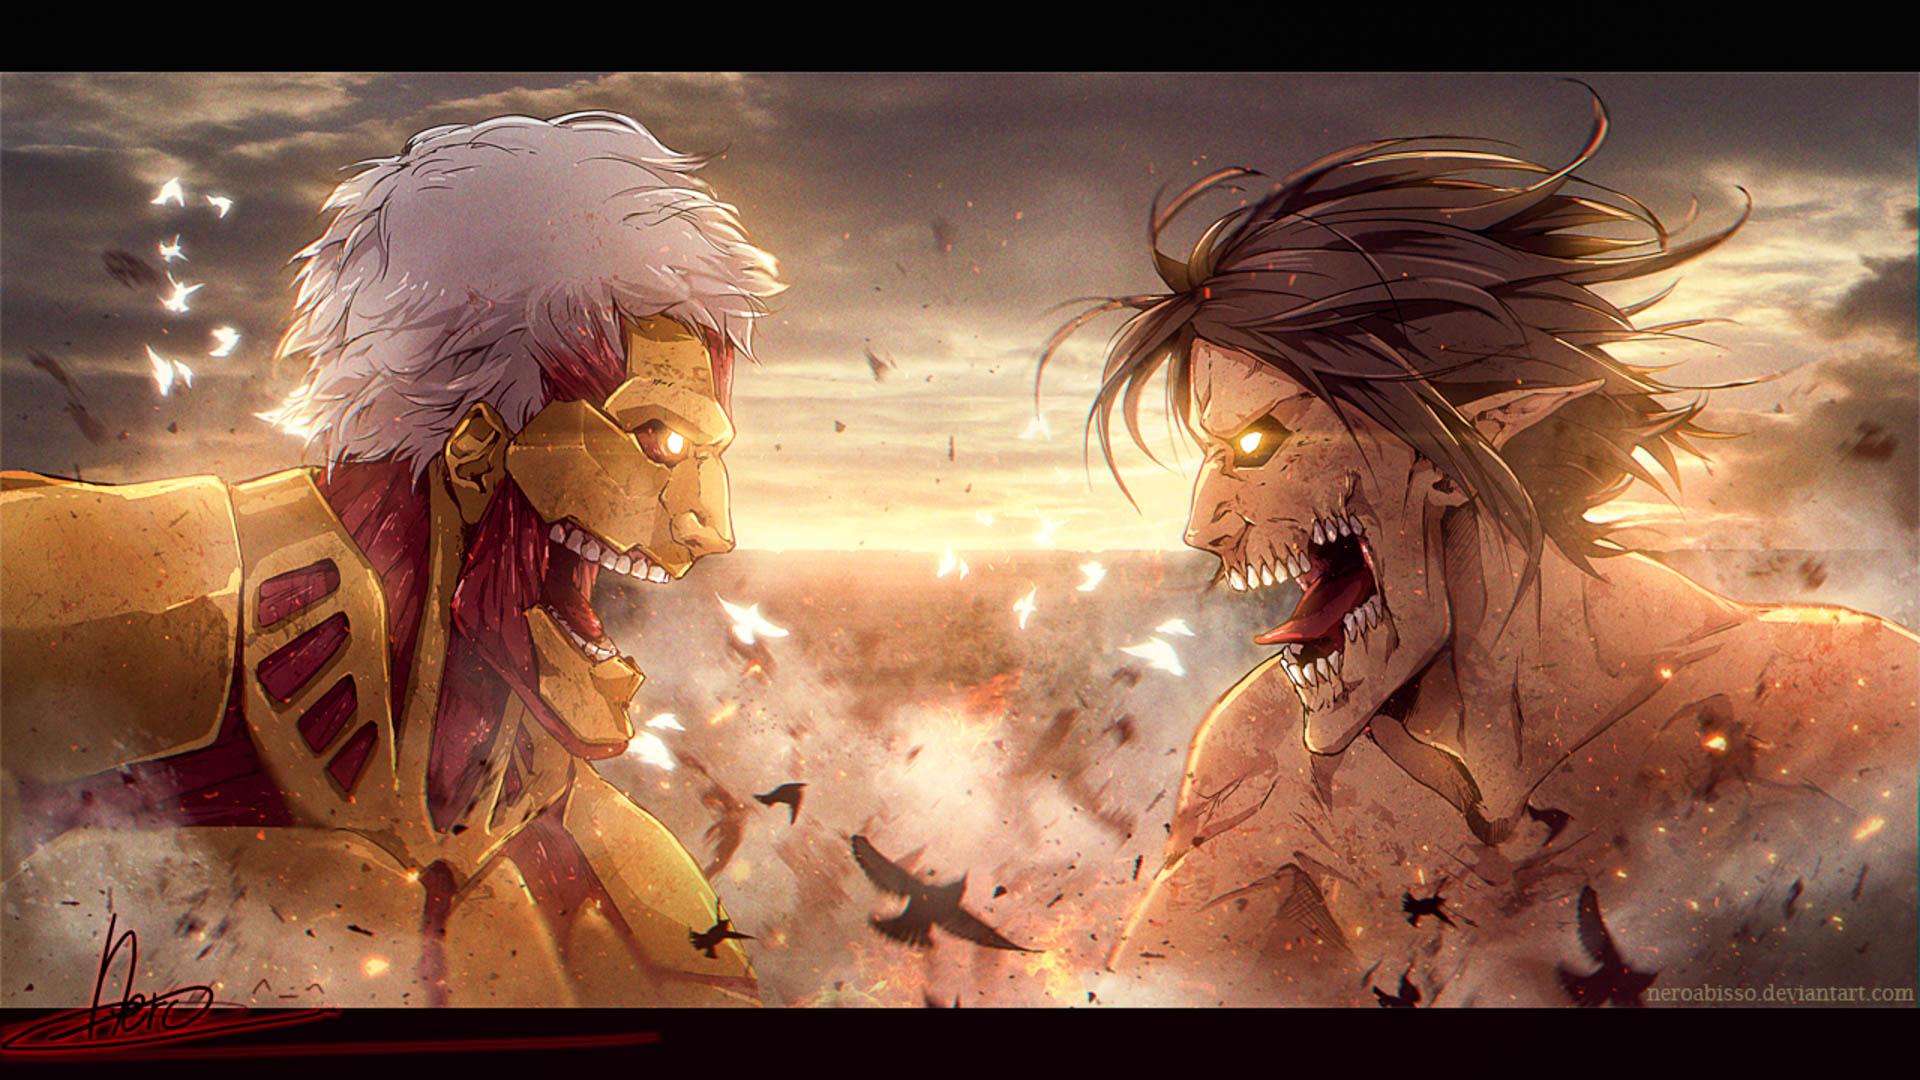 1920 x 1080 · jpeg - Attack On Titan Wallpaper In High Quality - All HD Wallpapers